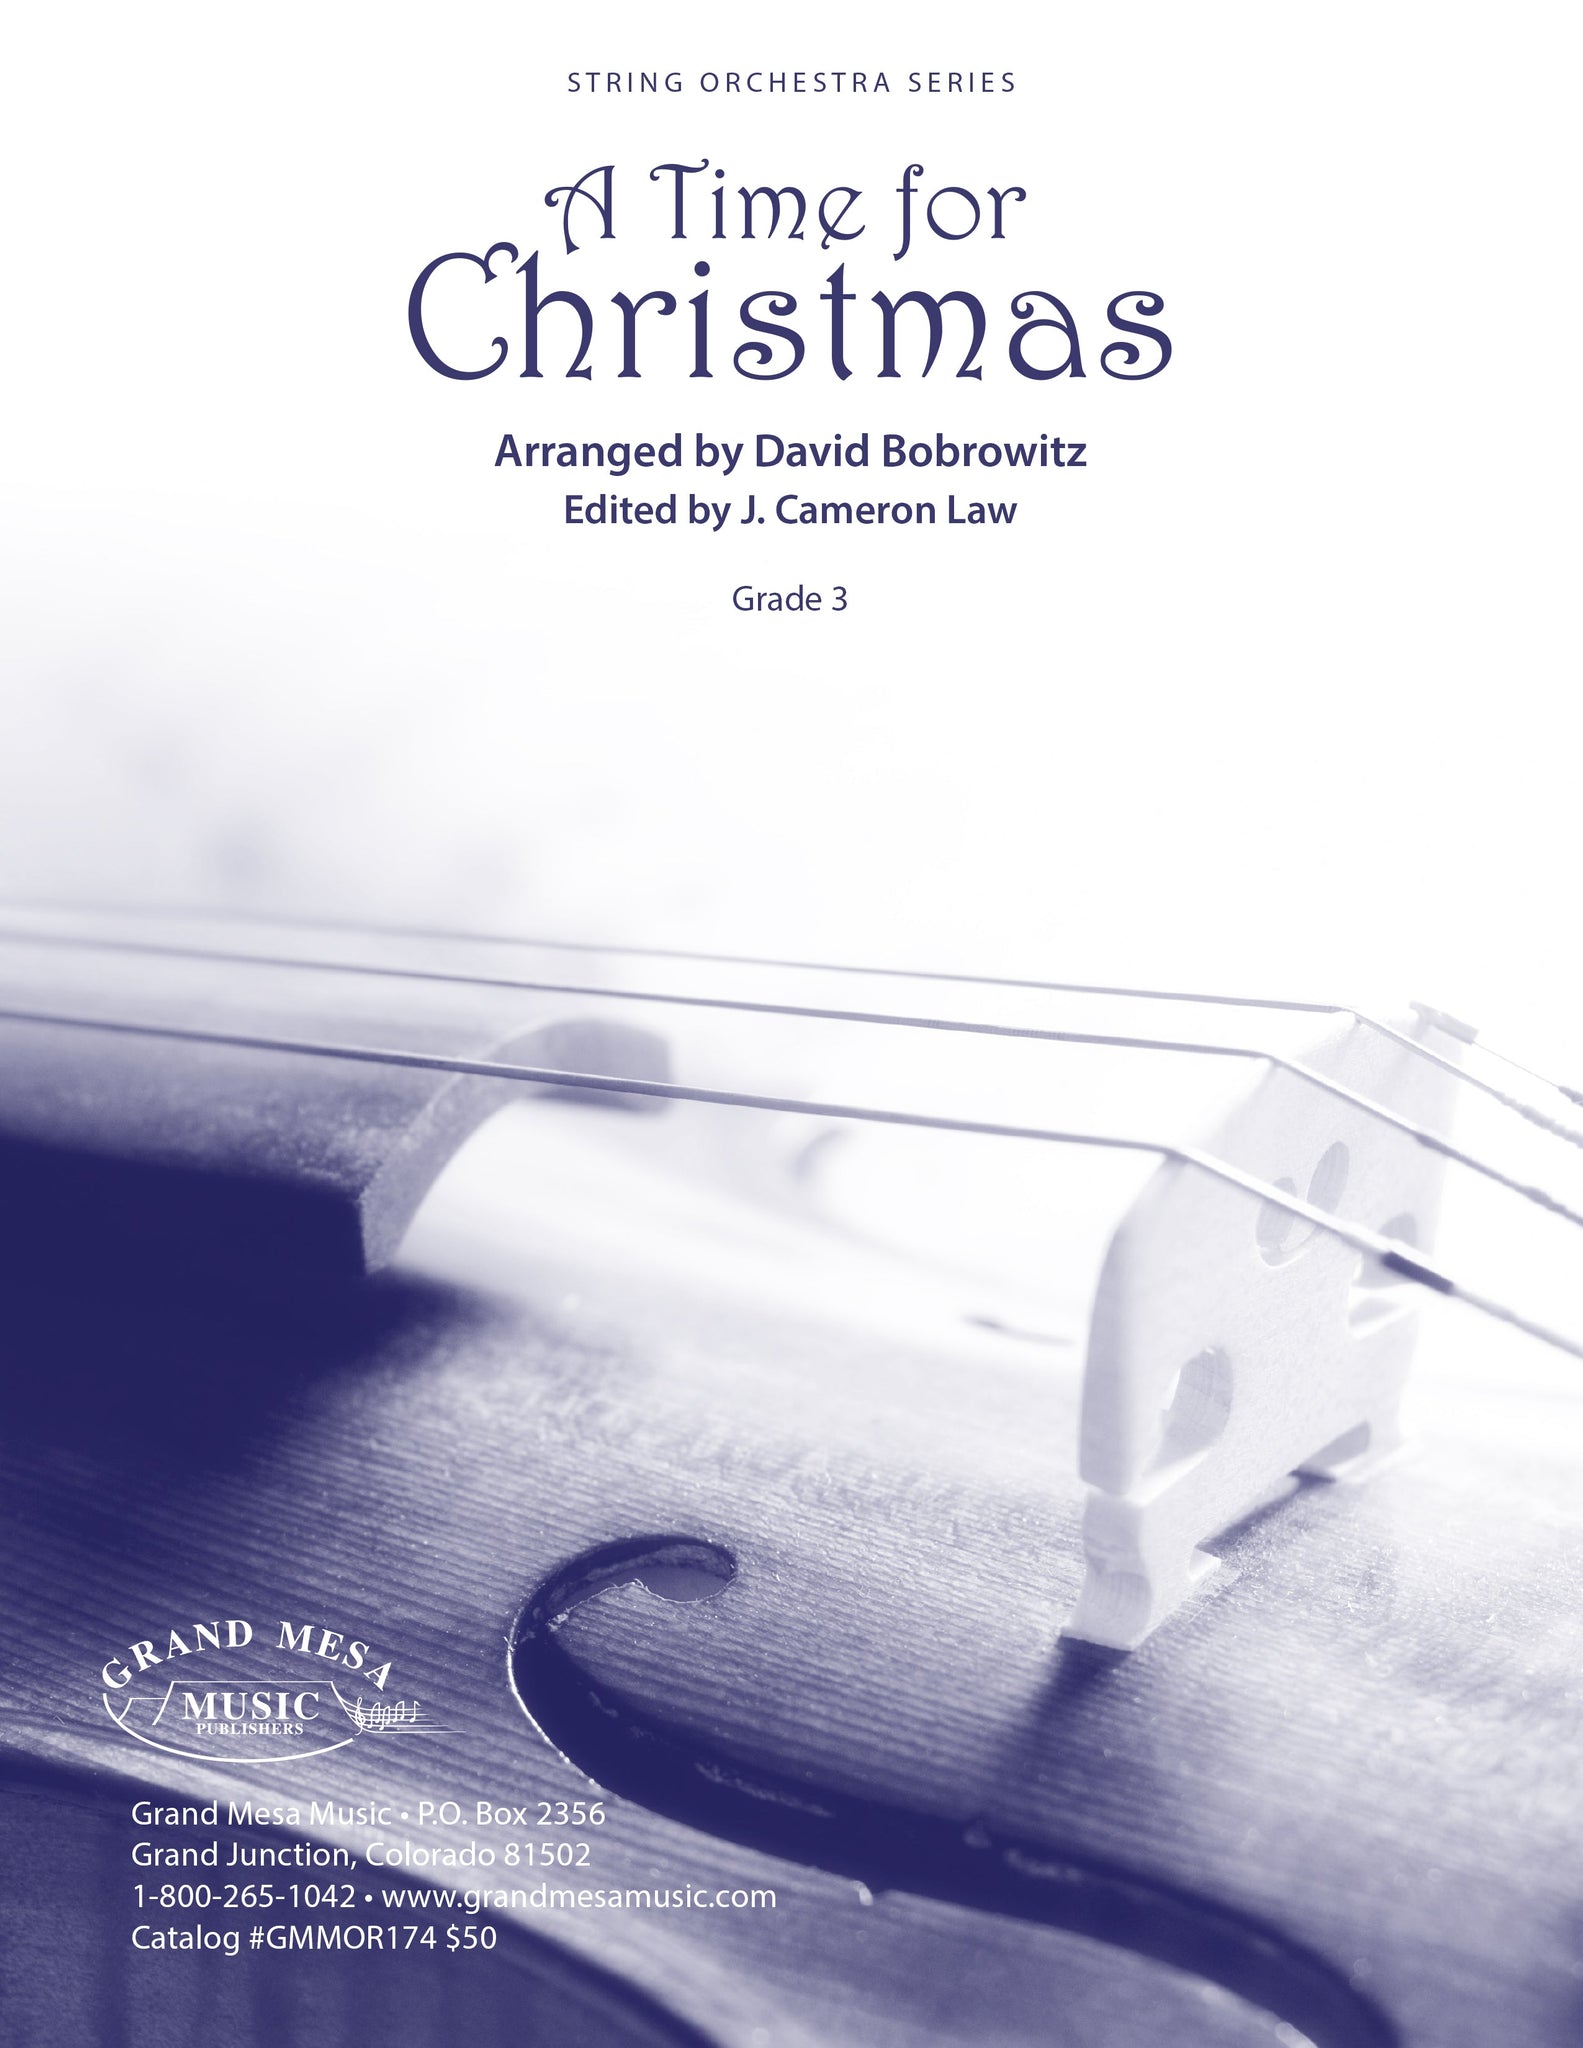 Strings sheet music cover of A Time for Christmas, arranged by David Bobrowitz.